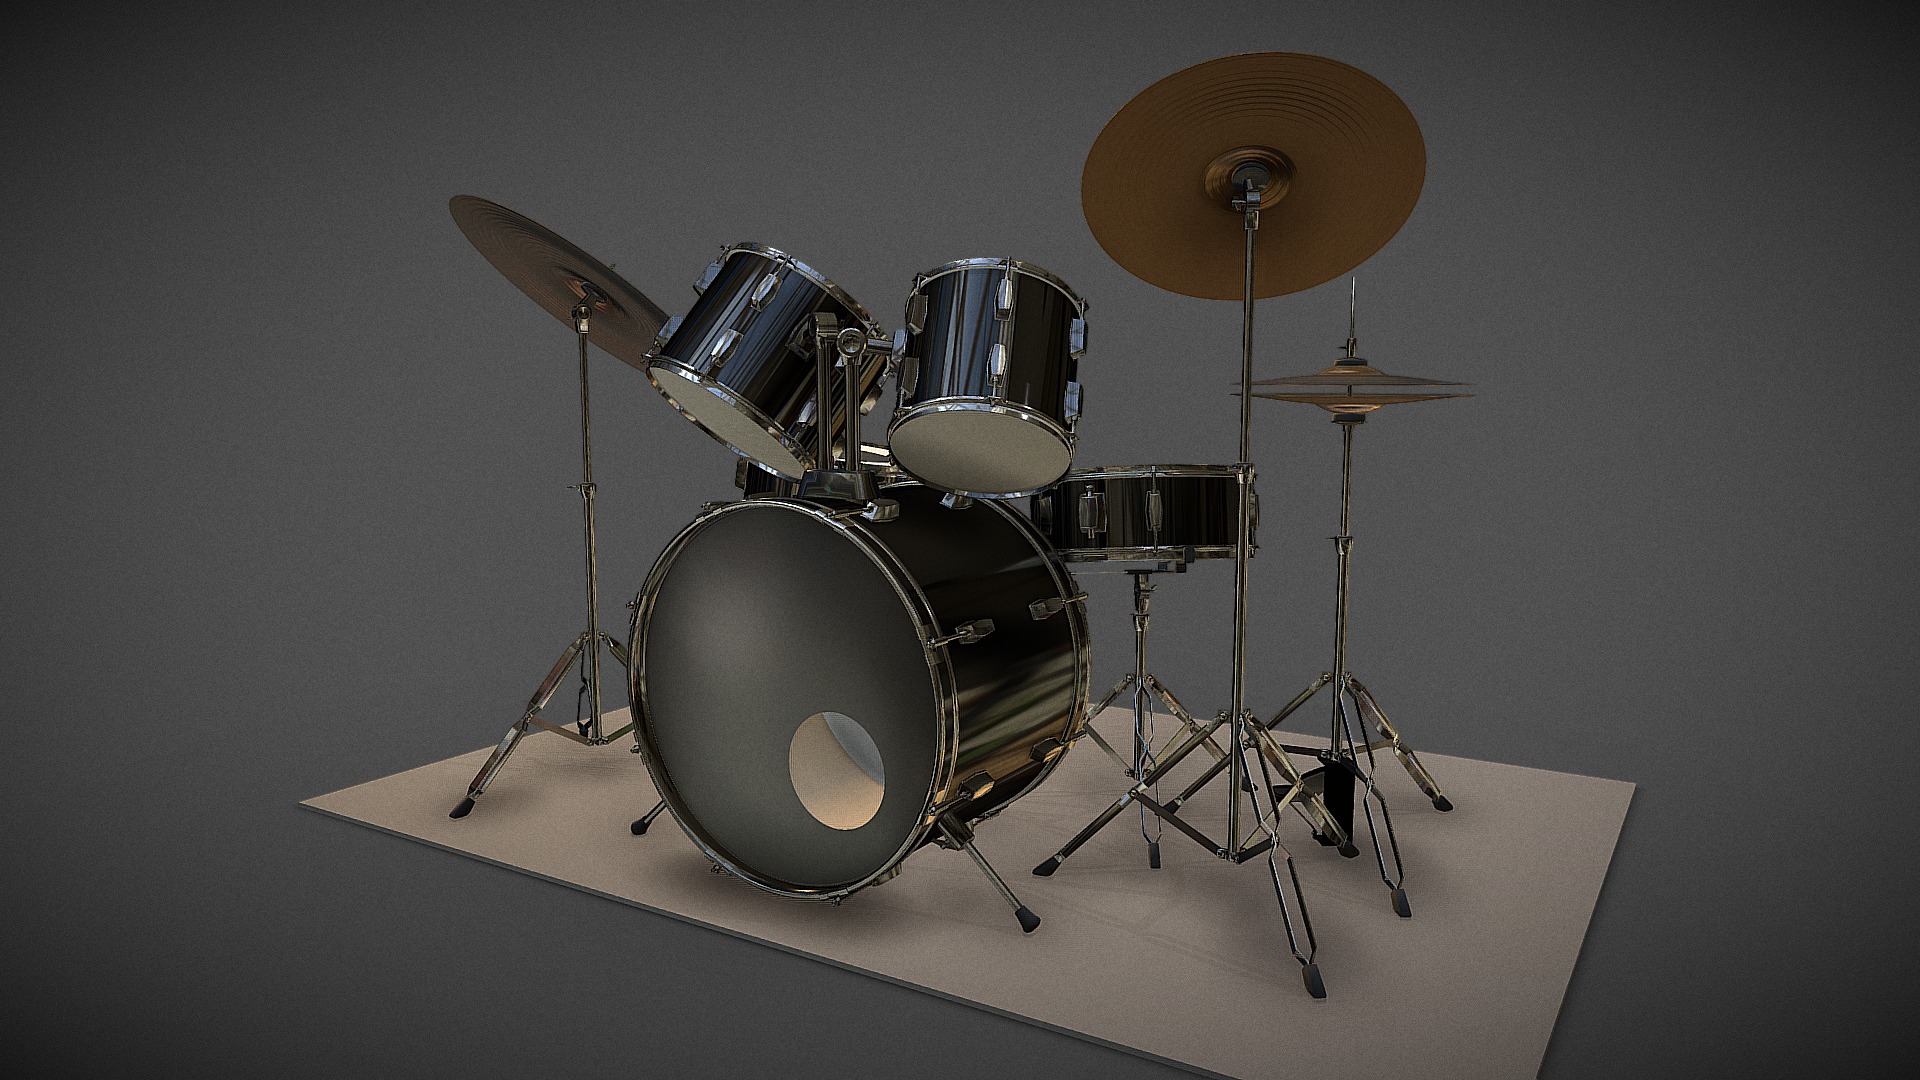 3D model Batería / Drum Set - This is a 3D model of the Batería / Drum Set. The 3D model is about a drum set on a white surface.